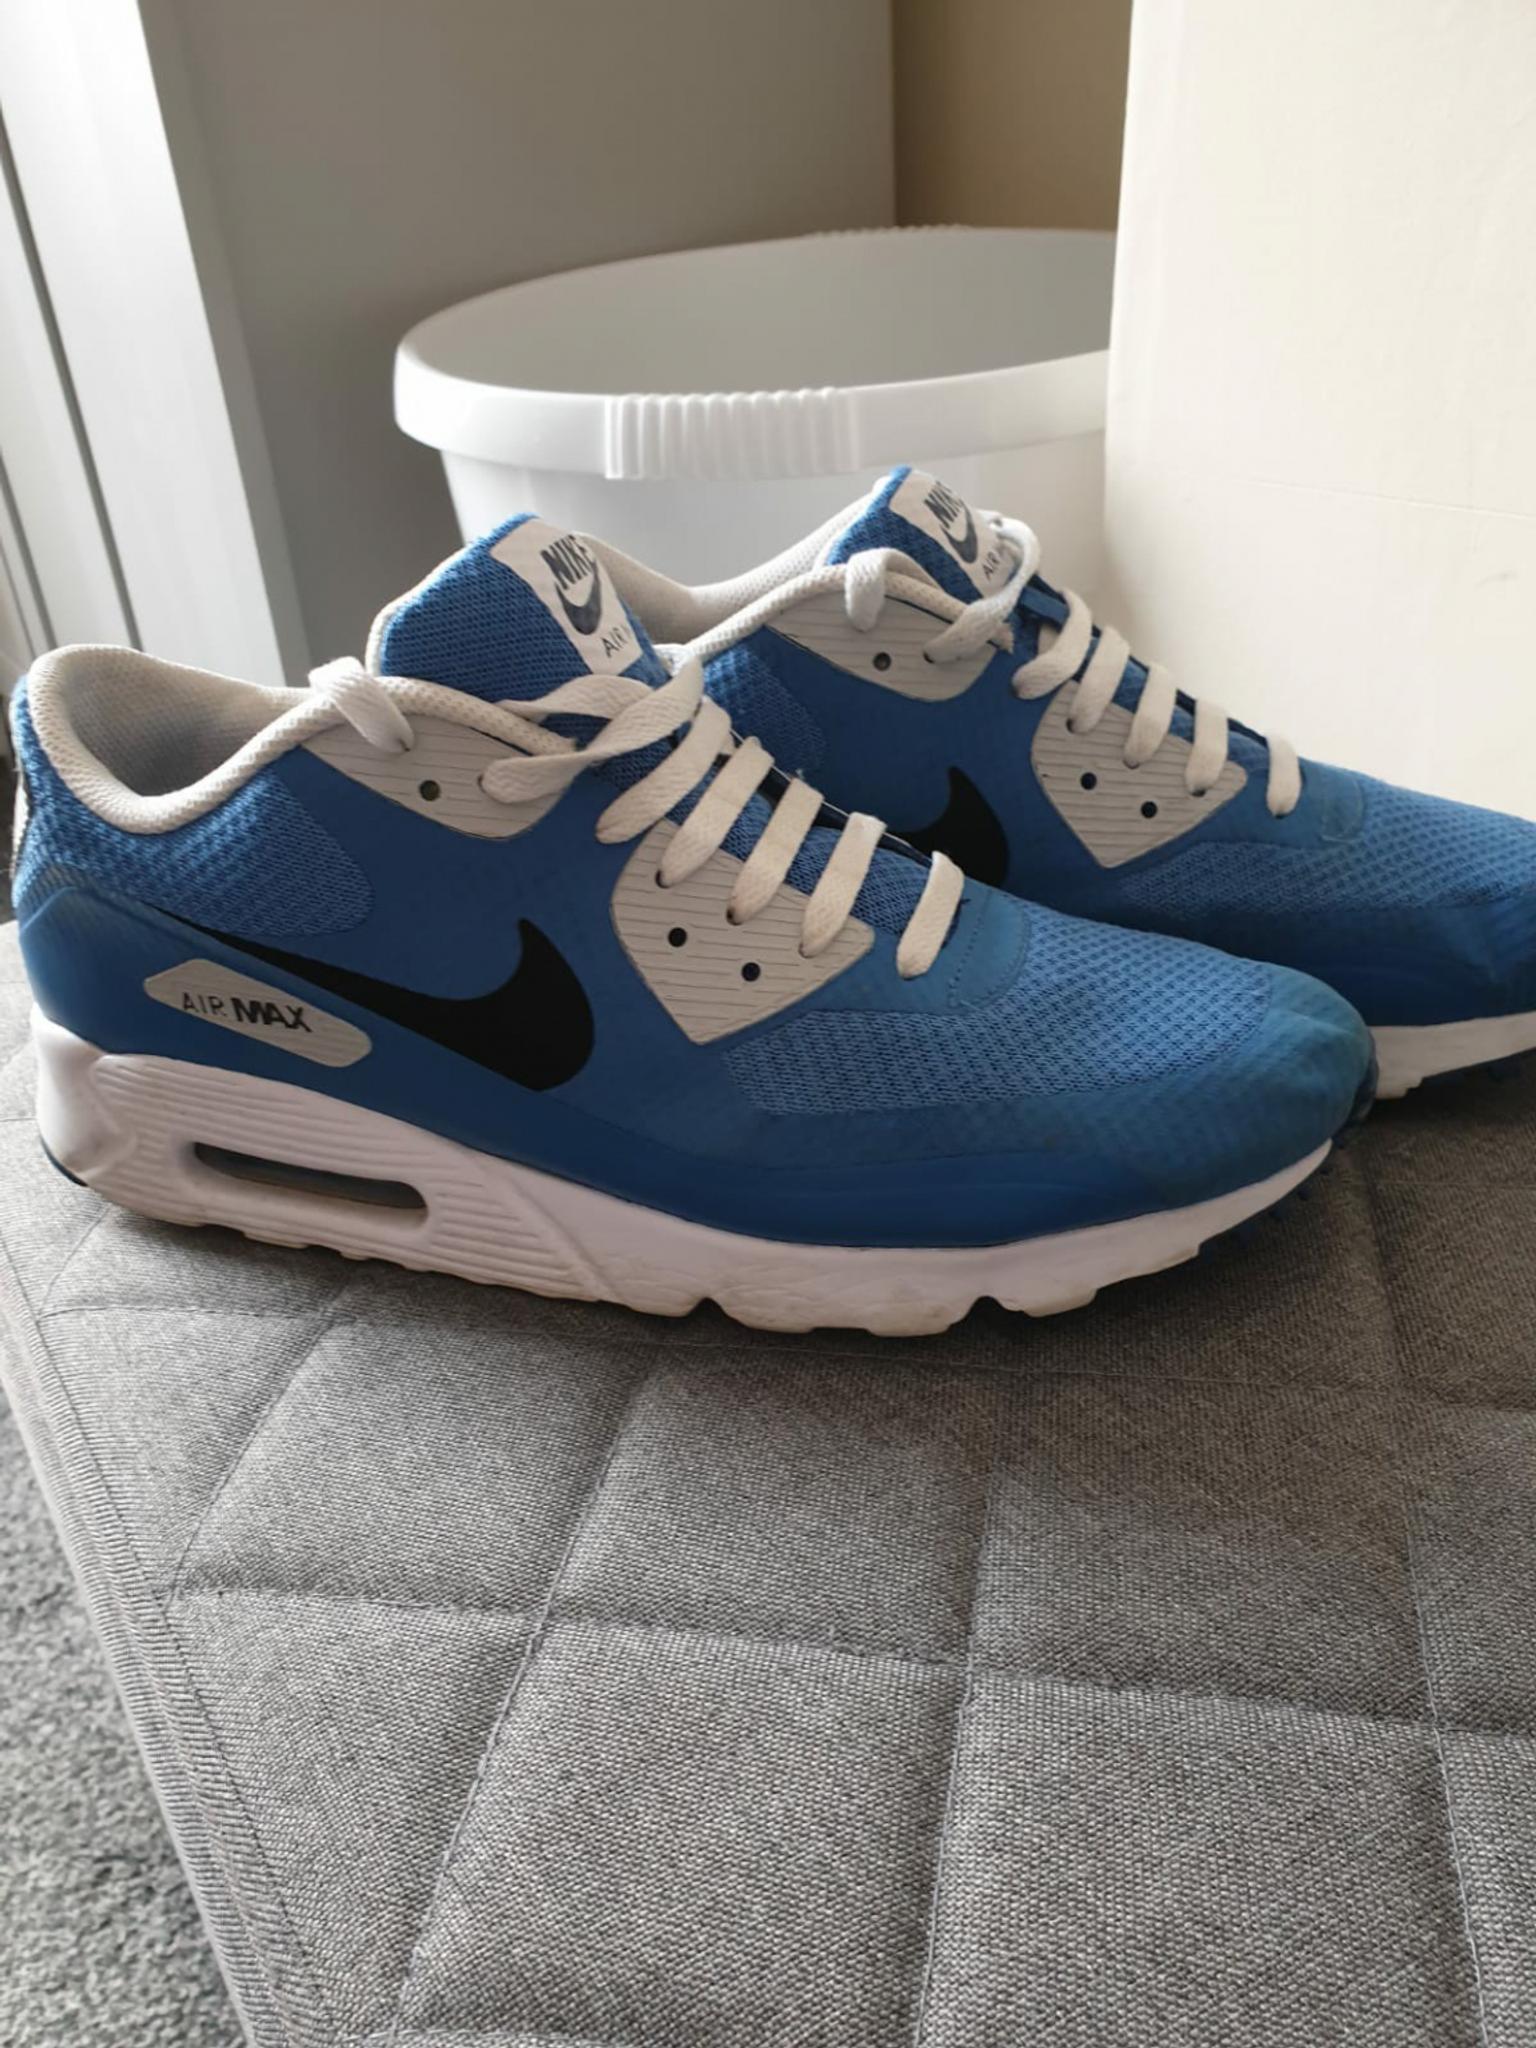 nike air max trainers size 10